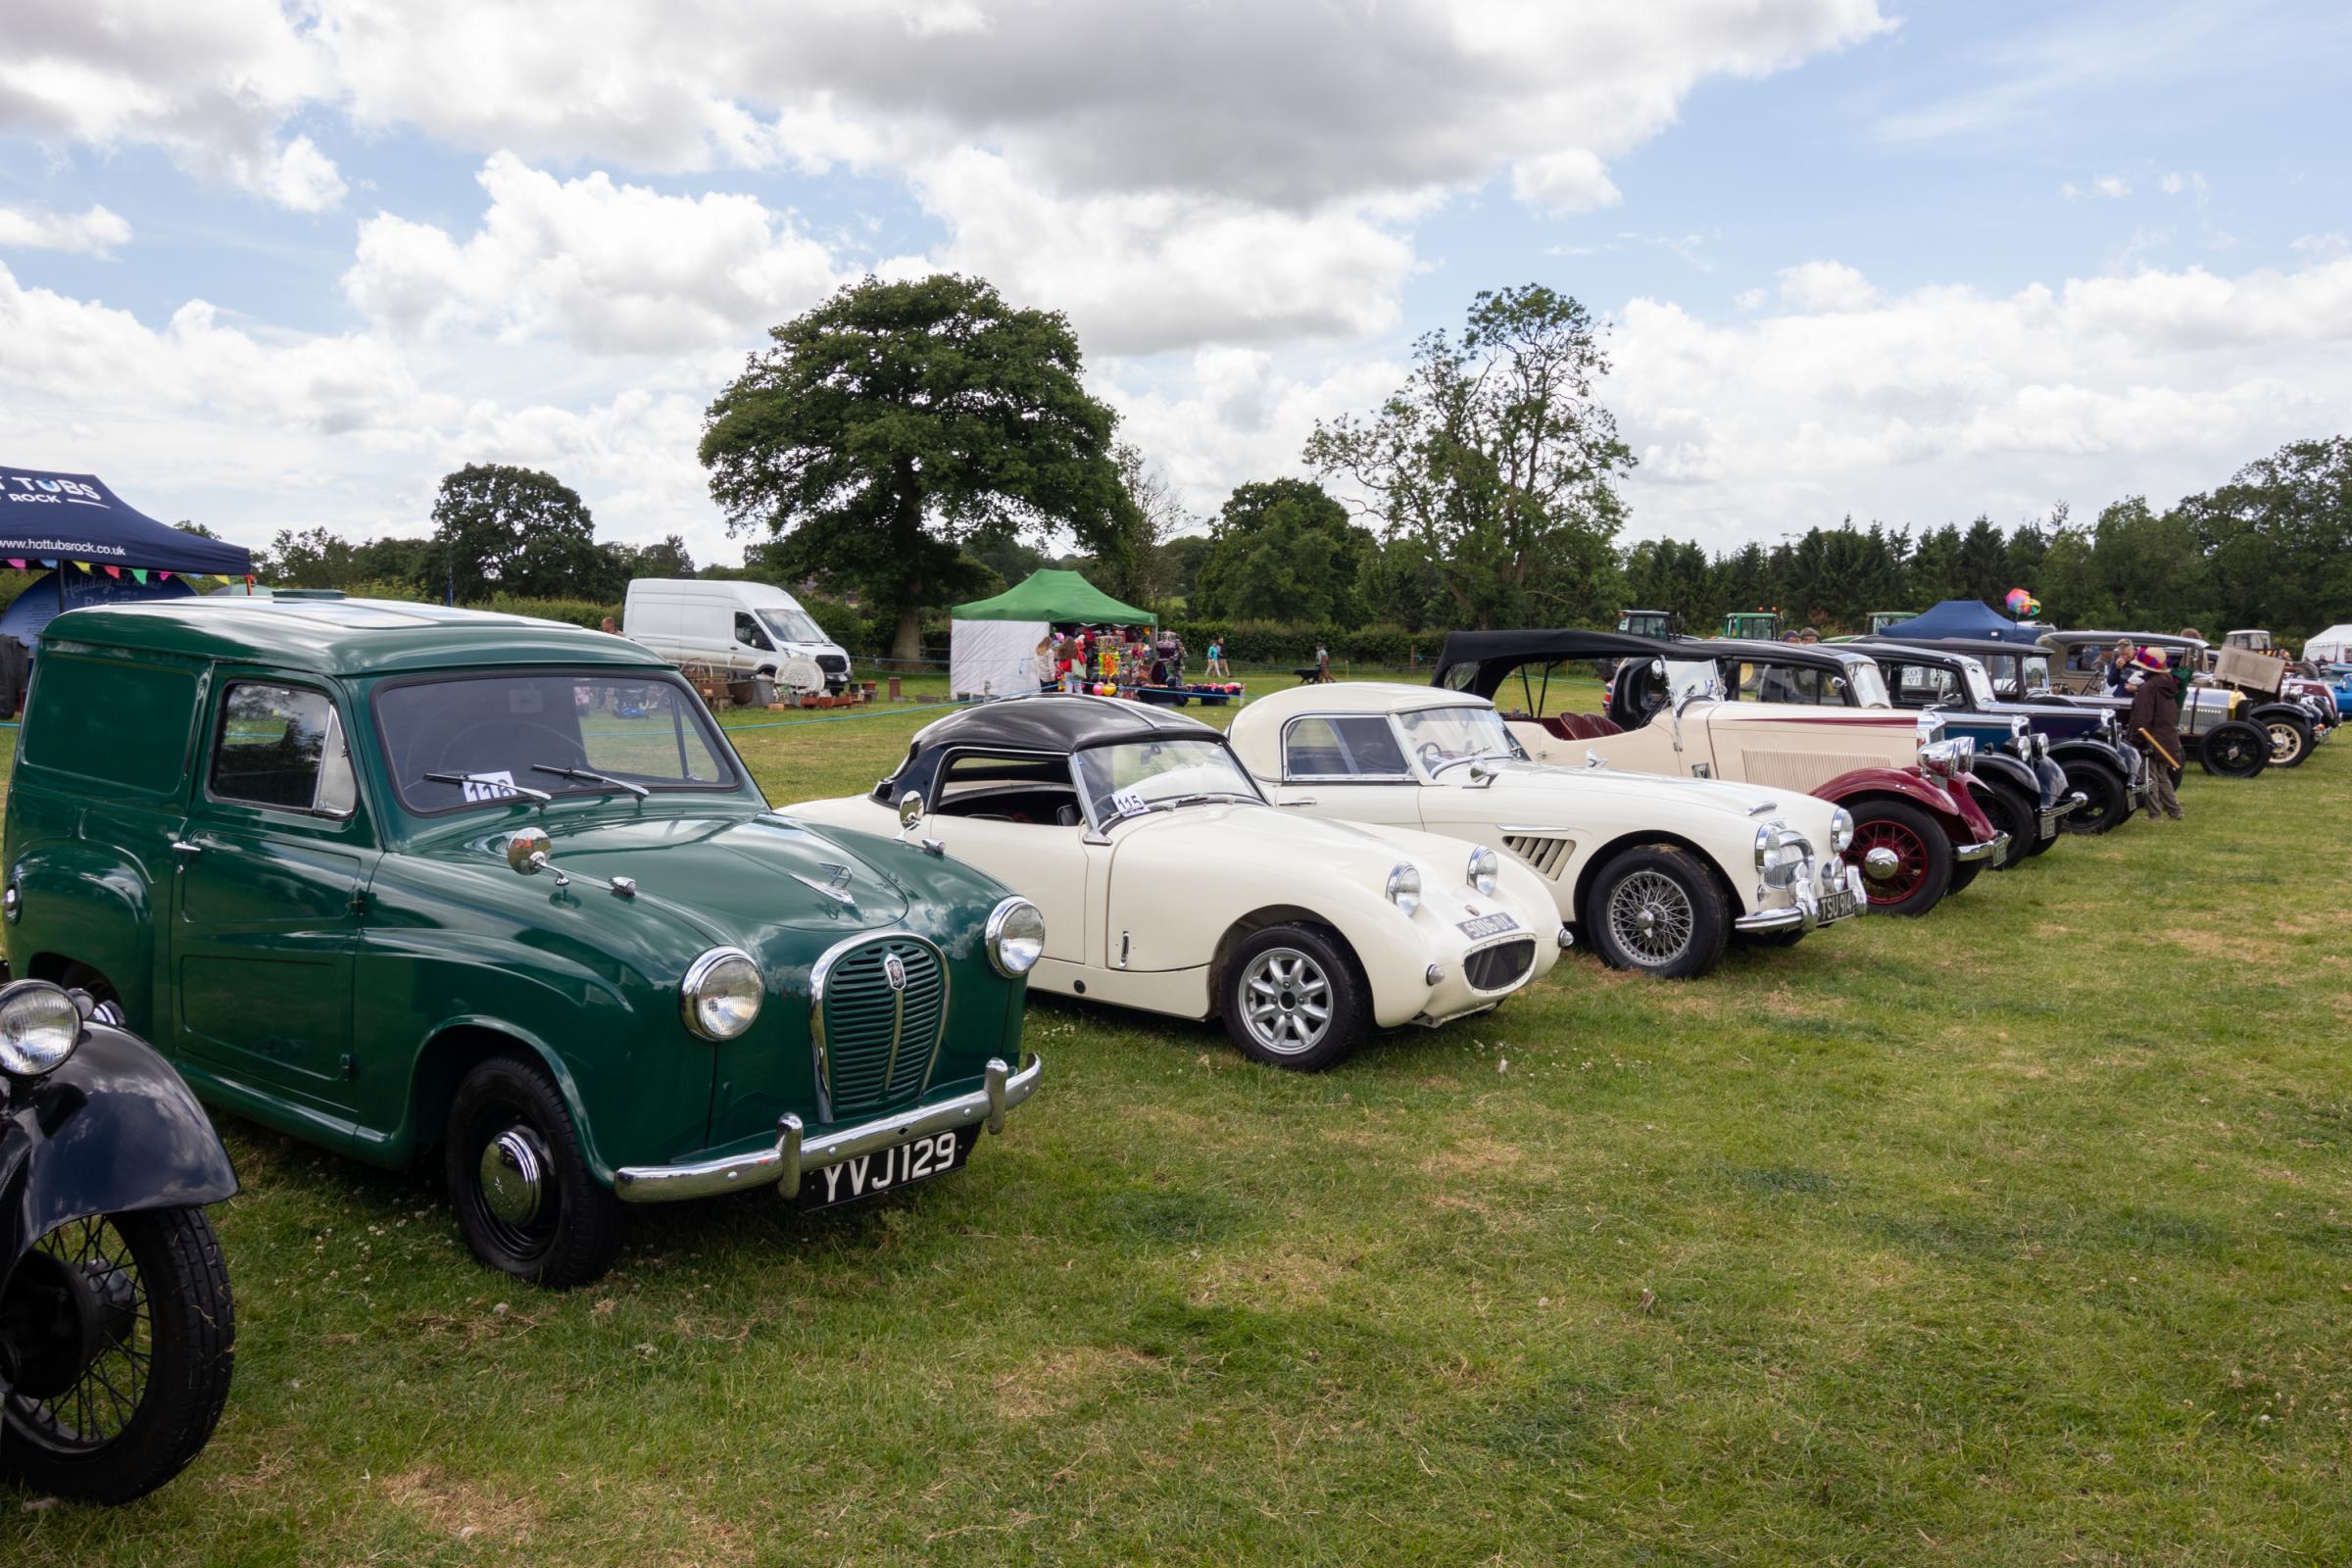 The classic and vintage cars ranged from Minis to Jaguars. Picture: Sofie Smith